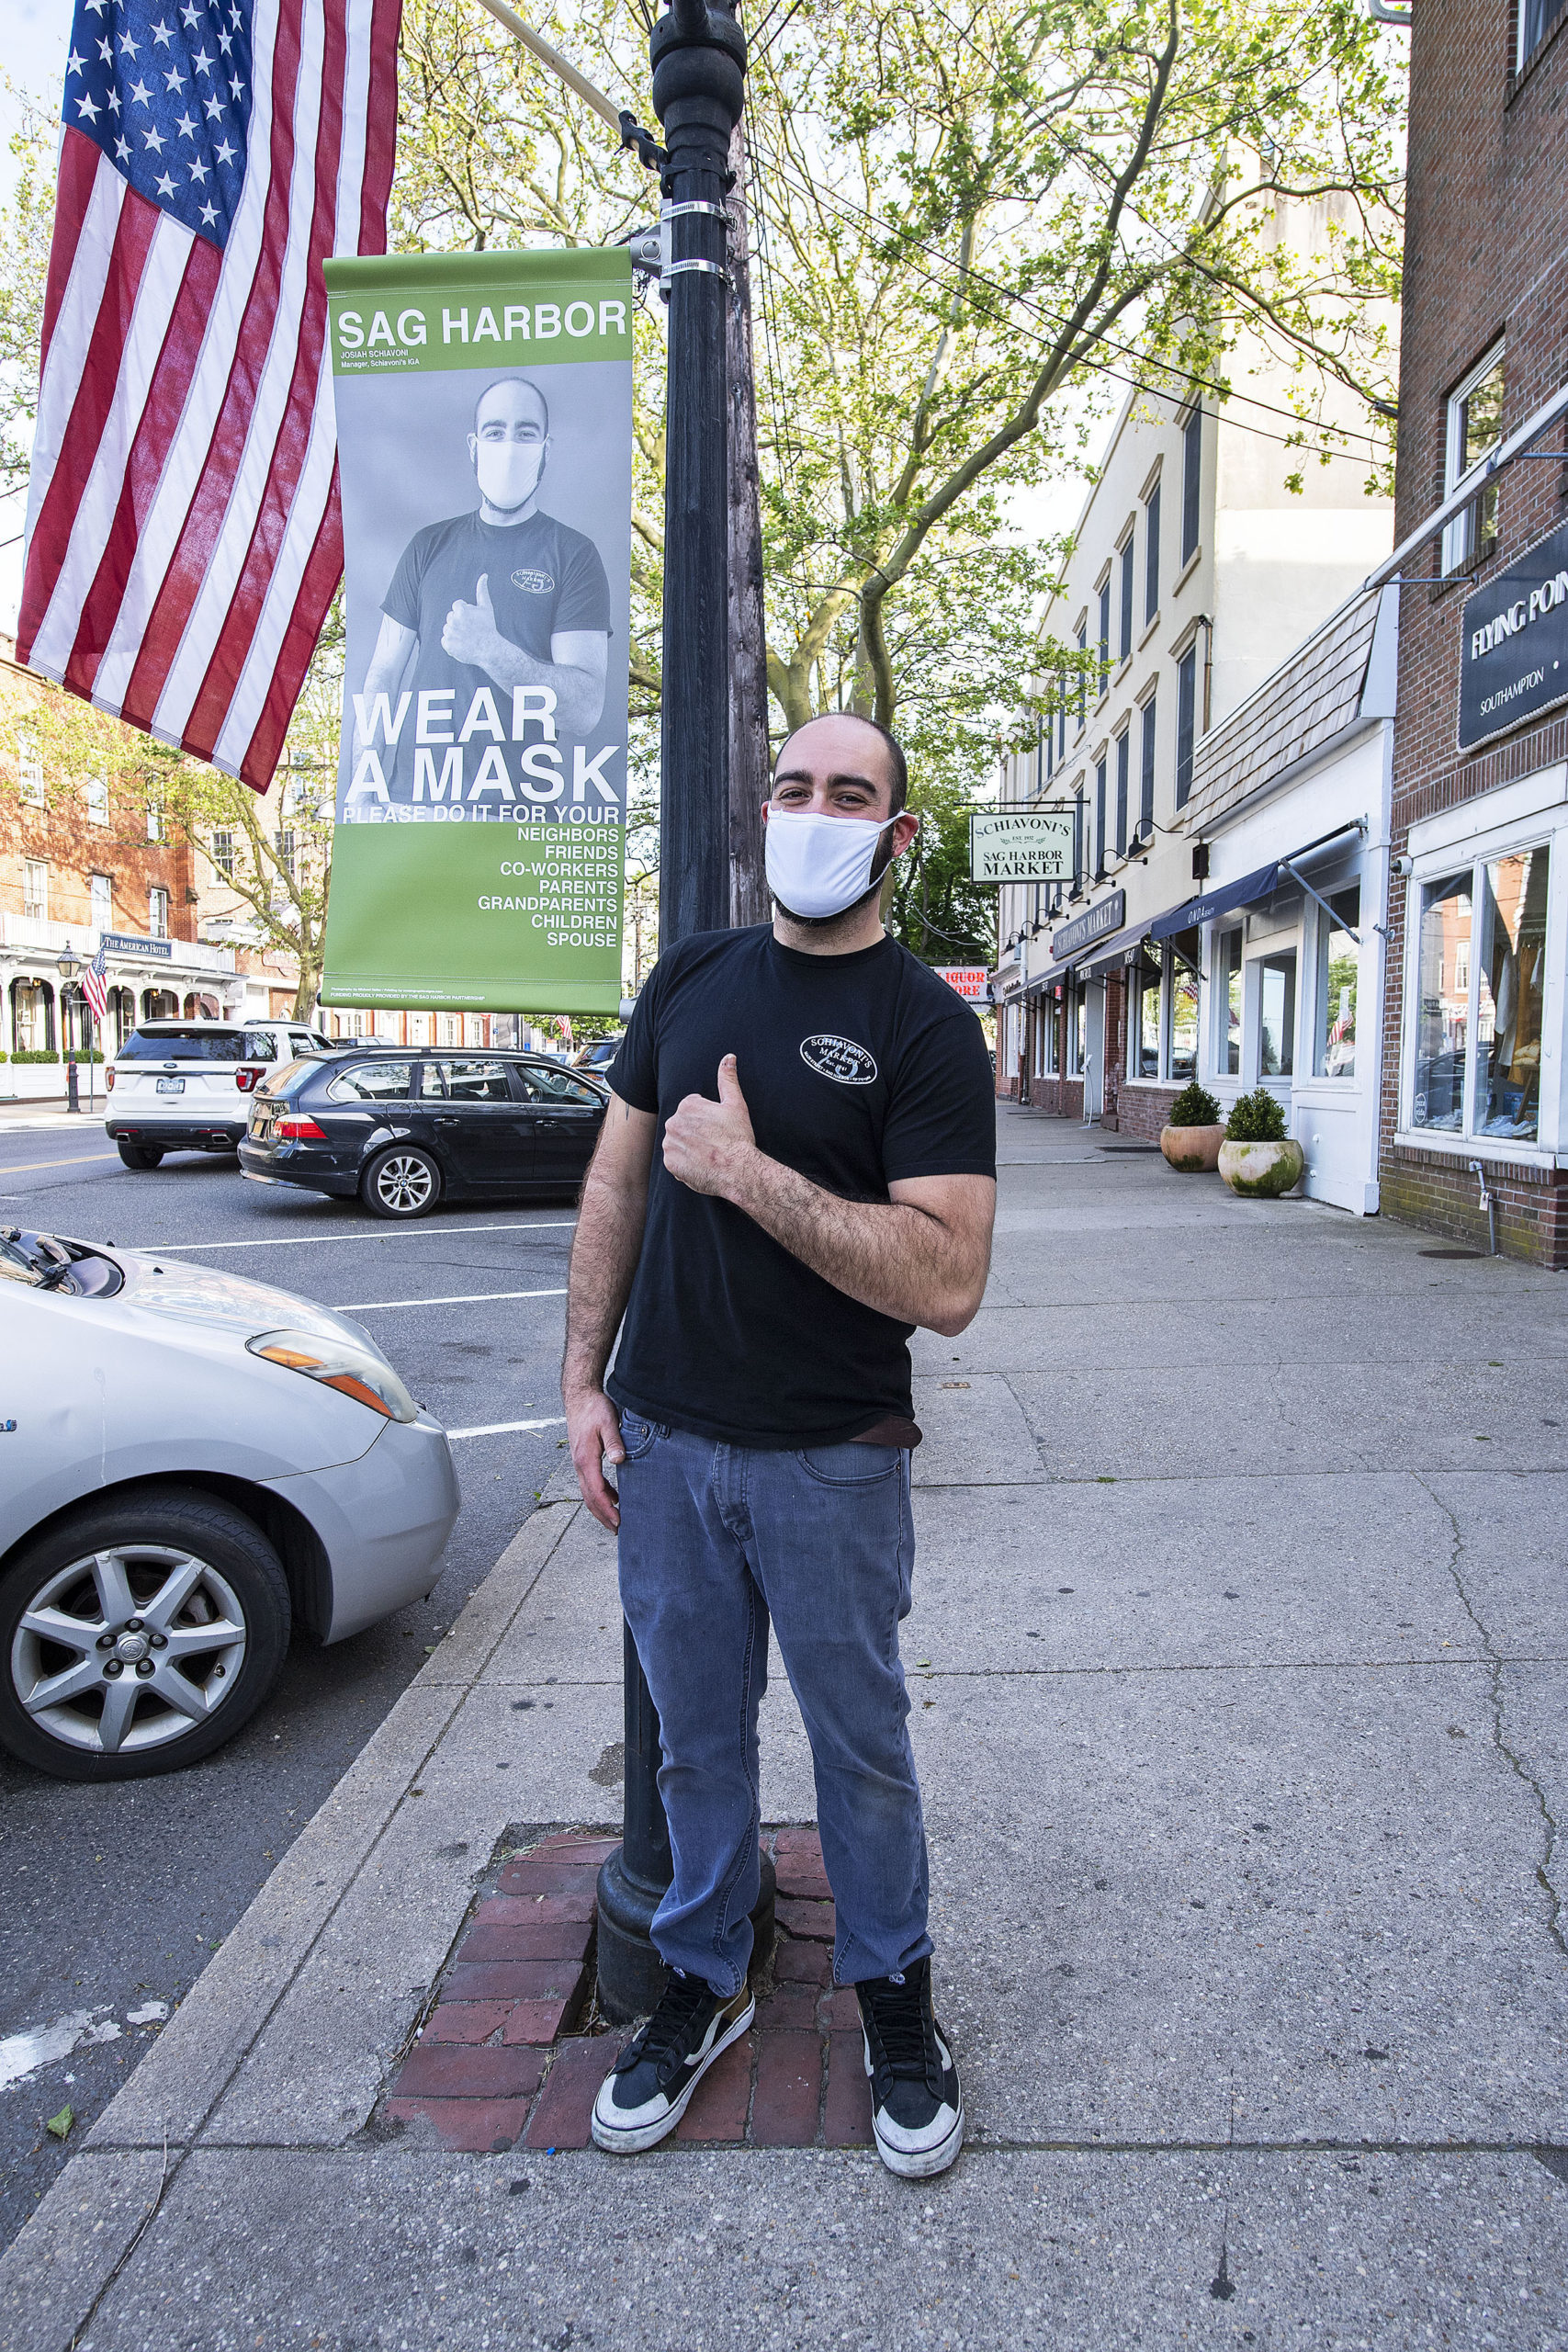 Josiah Schiavoni in front of the banner on Main Street he posed for as part of the Sag Harbor Wear A Mask campaign, photographed on Friday.  MICHAEL HELLER